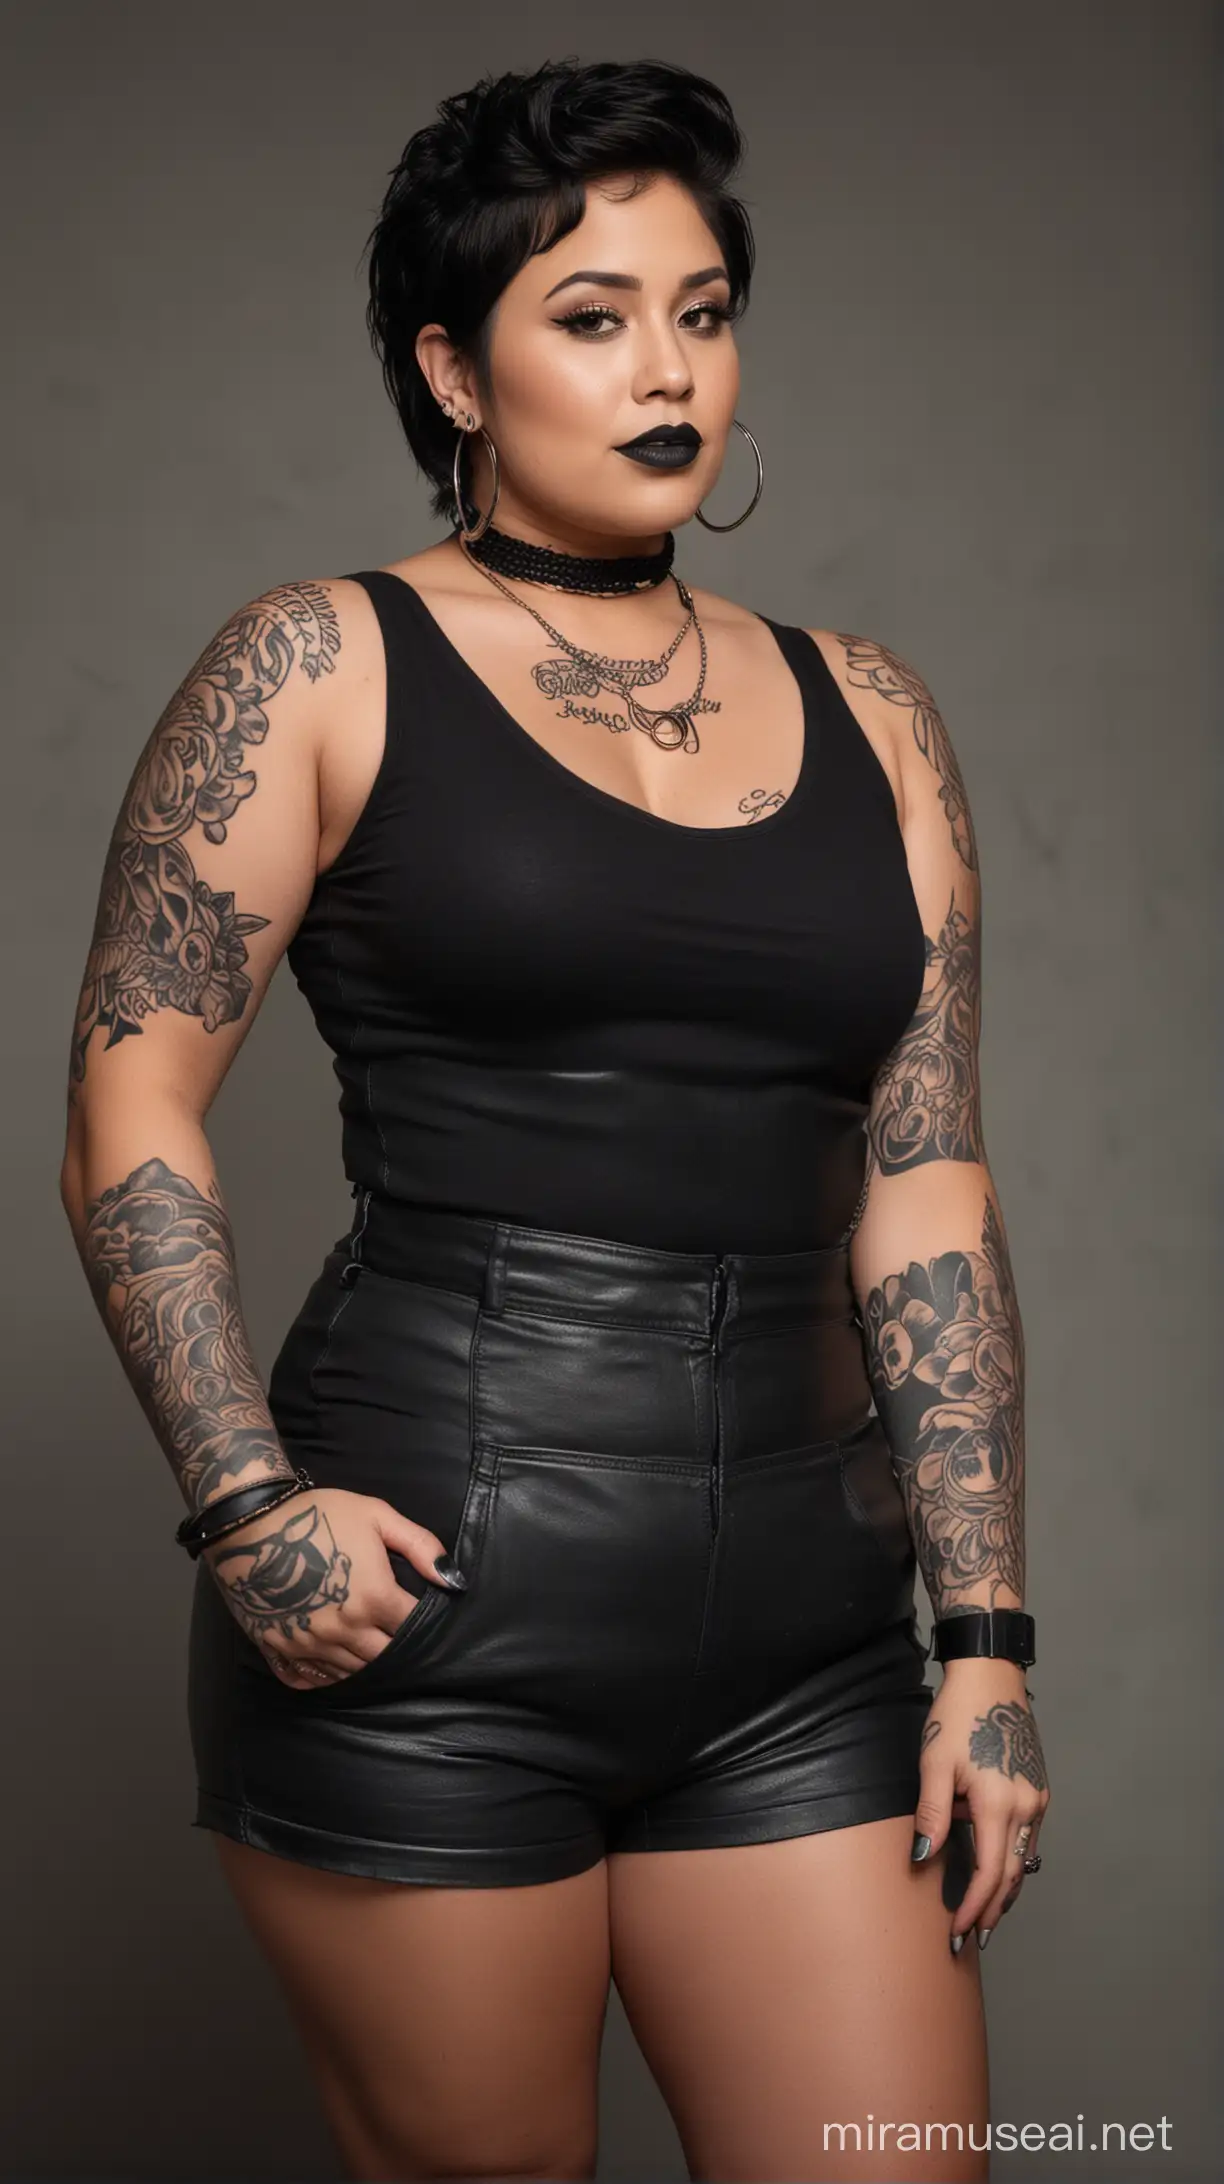 Beautiful Chubby Chicana in Renaissance Pose Vieja with Black Lipstick and Tattoos